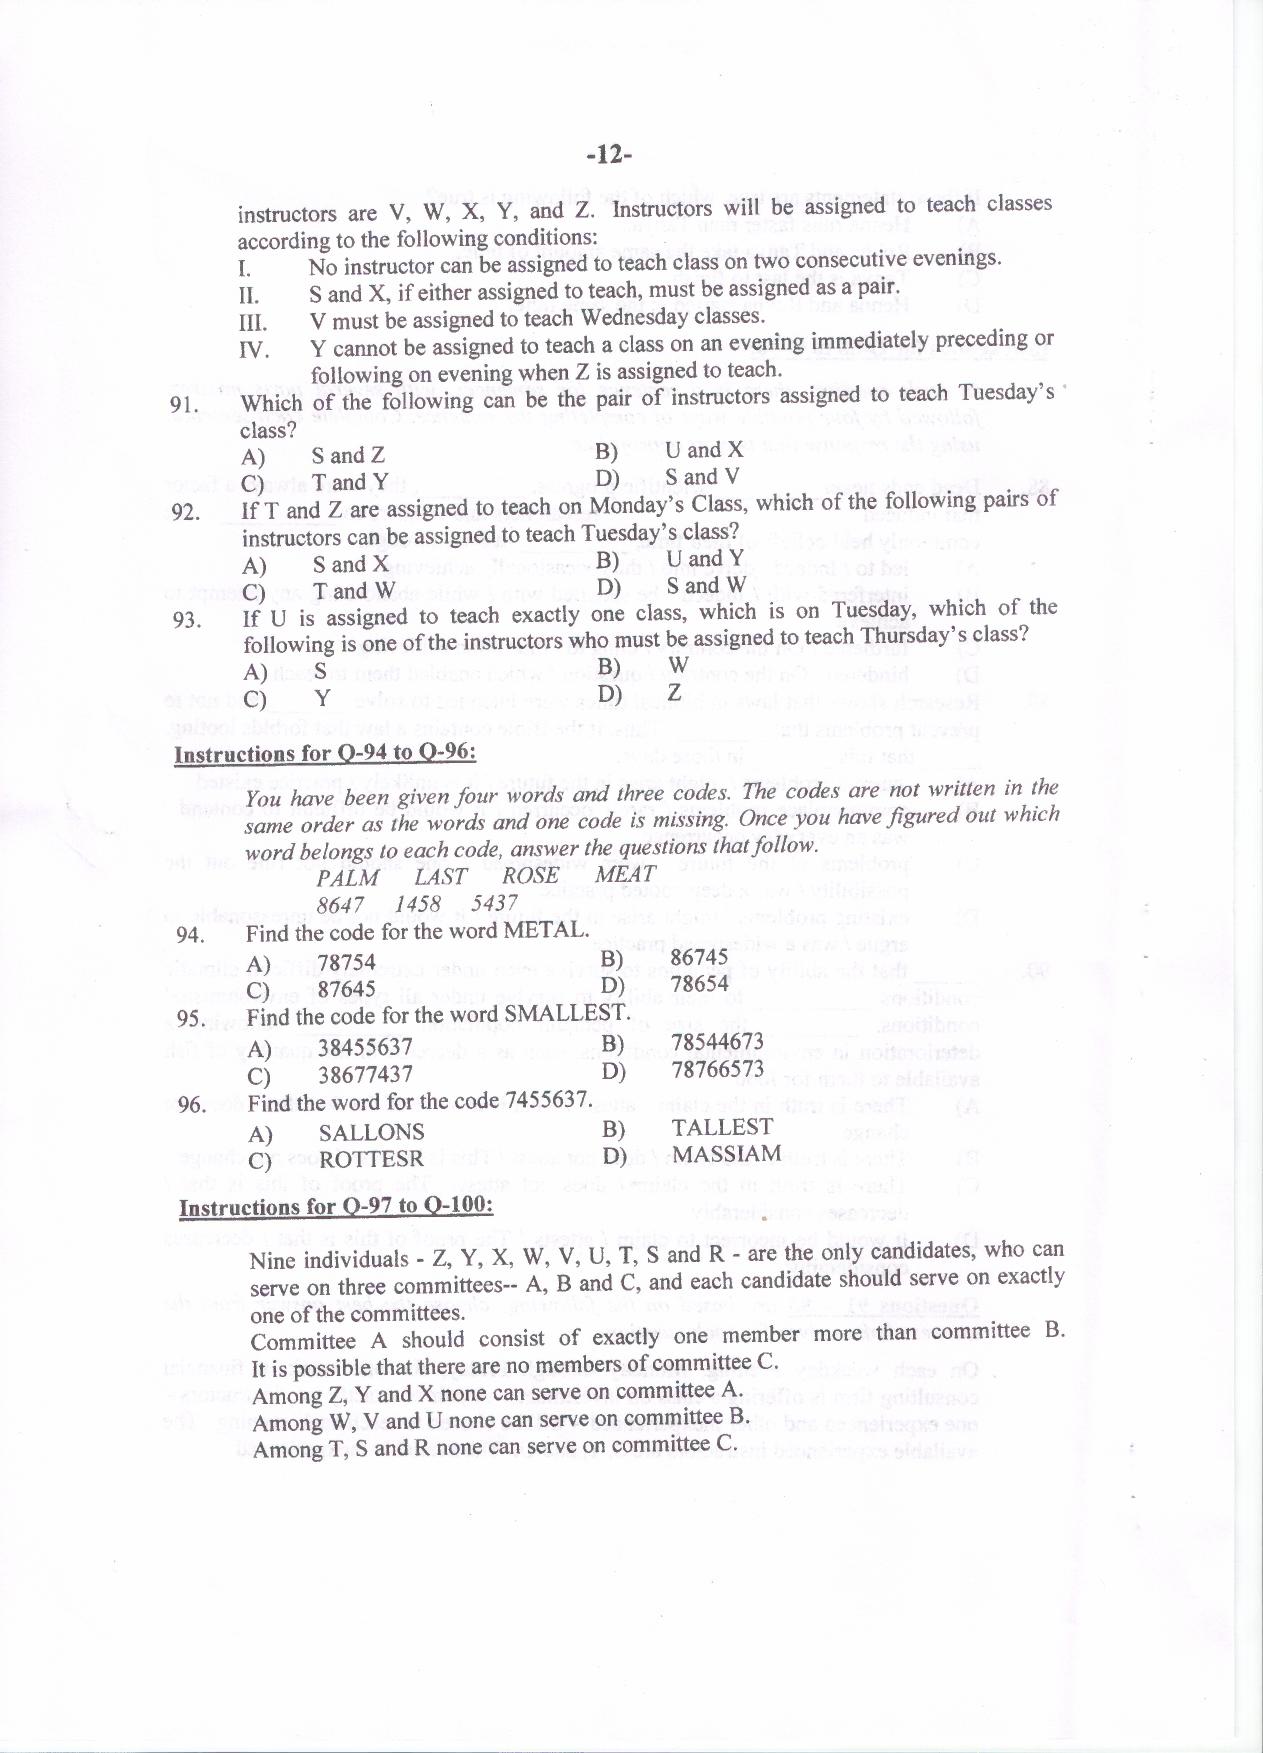 PU MET 2014 Question Booklet with Key - Page 12